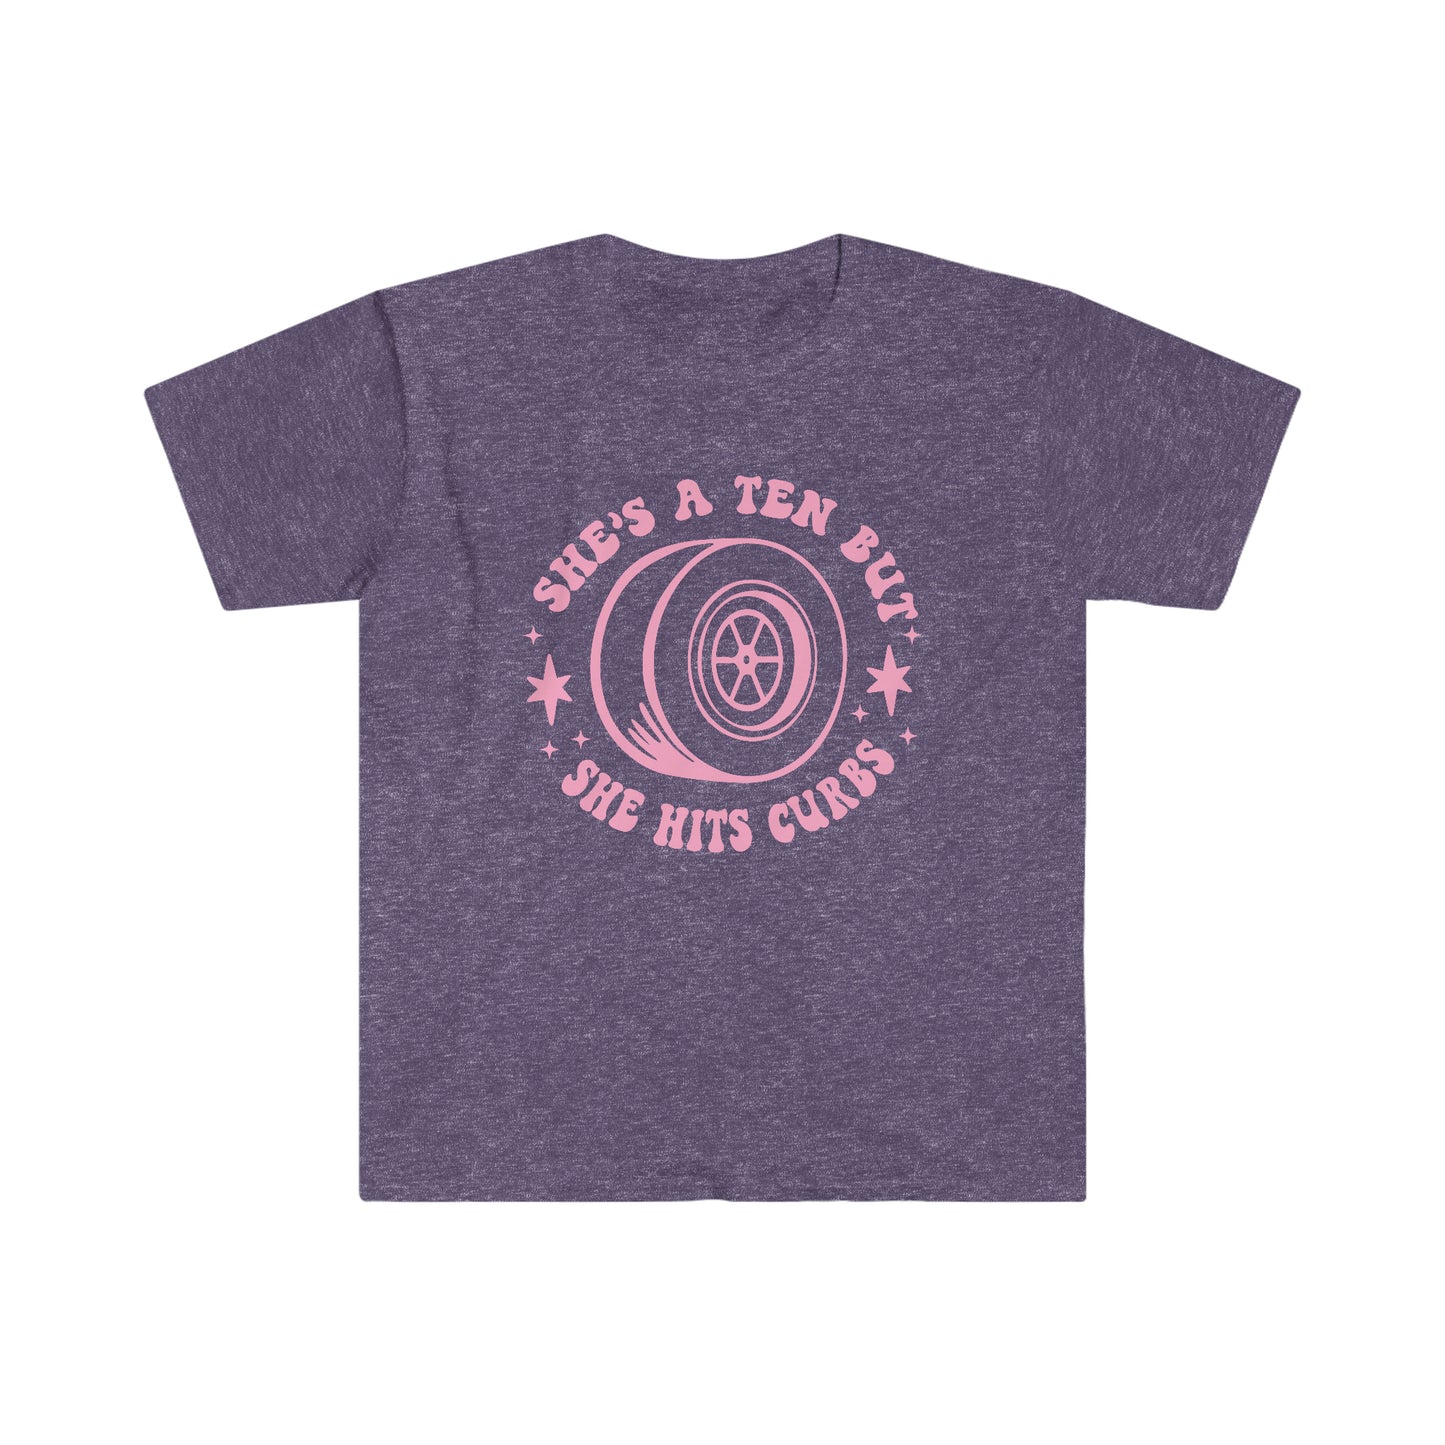 "She's a ten, but she hits curbs" Unisex Softstyle T-Shirt